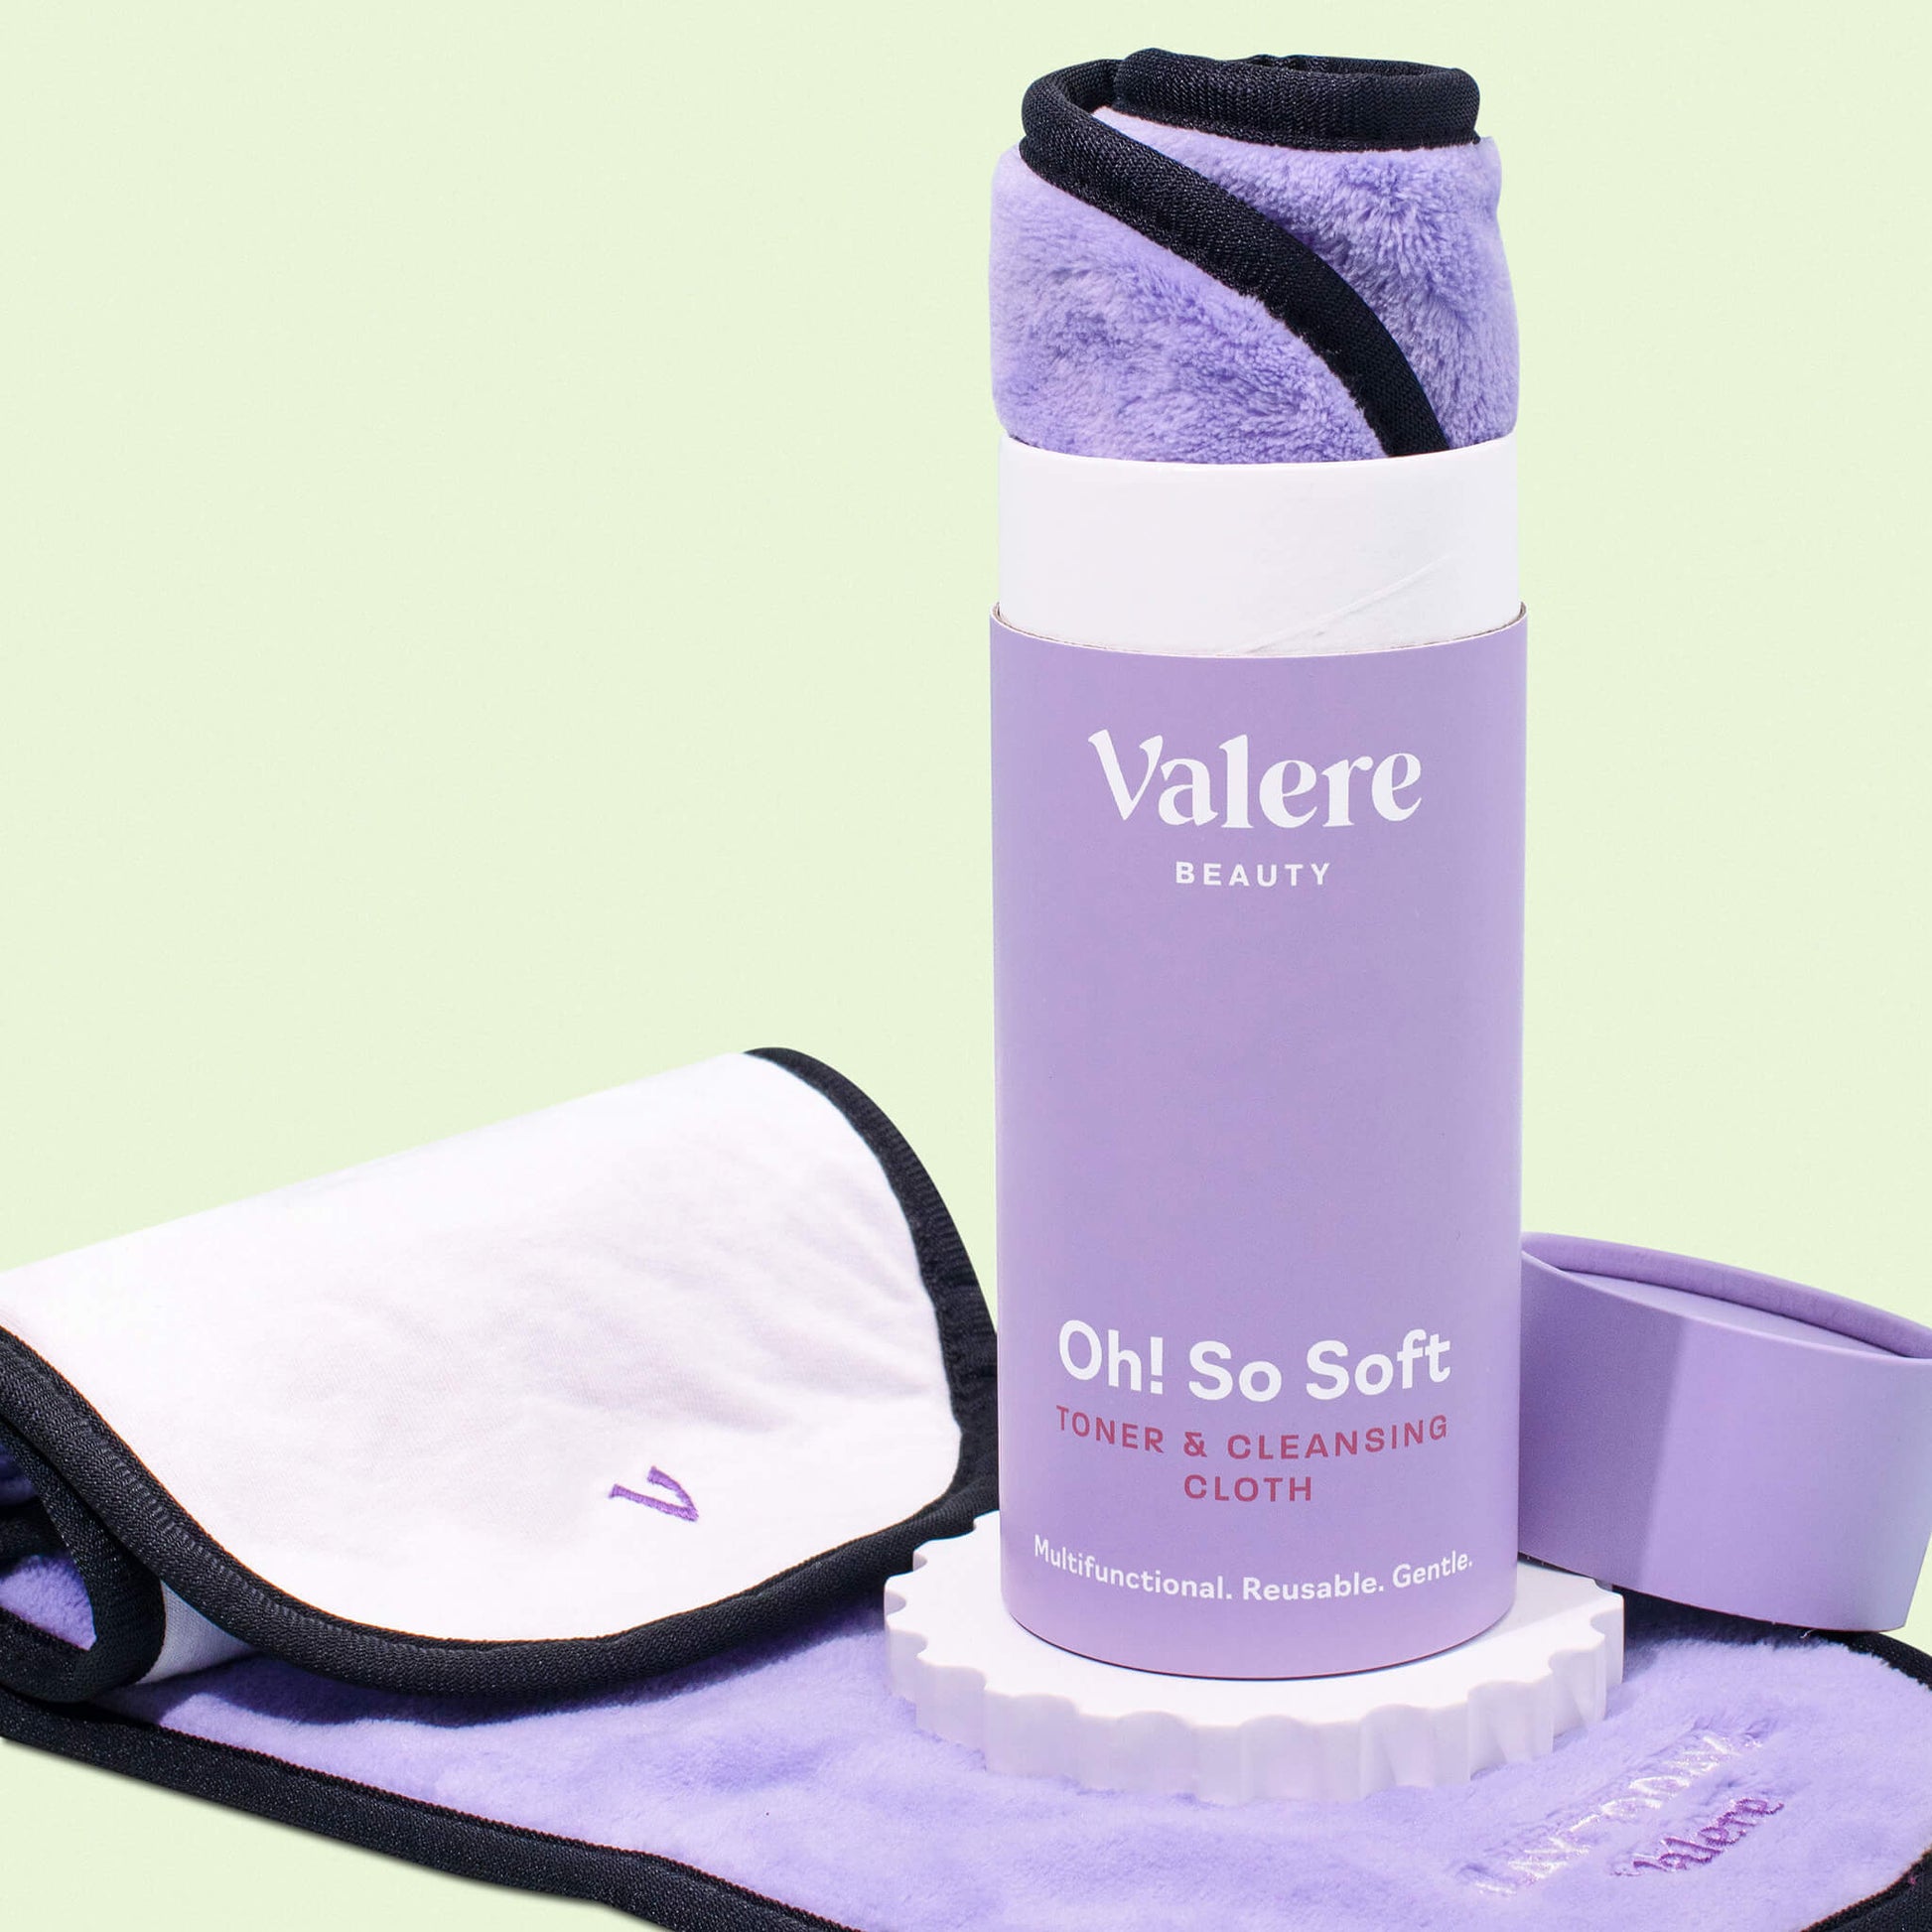 Valere Beauty Oh! So Soft Toner & Cleansing Cloth Microfiber Makeup Remover Cloth and Bamboo Cotton Toner Cloth Single Bundle in the cylinder packaging